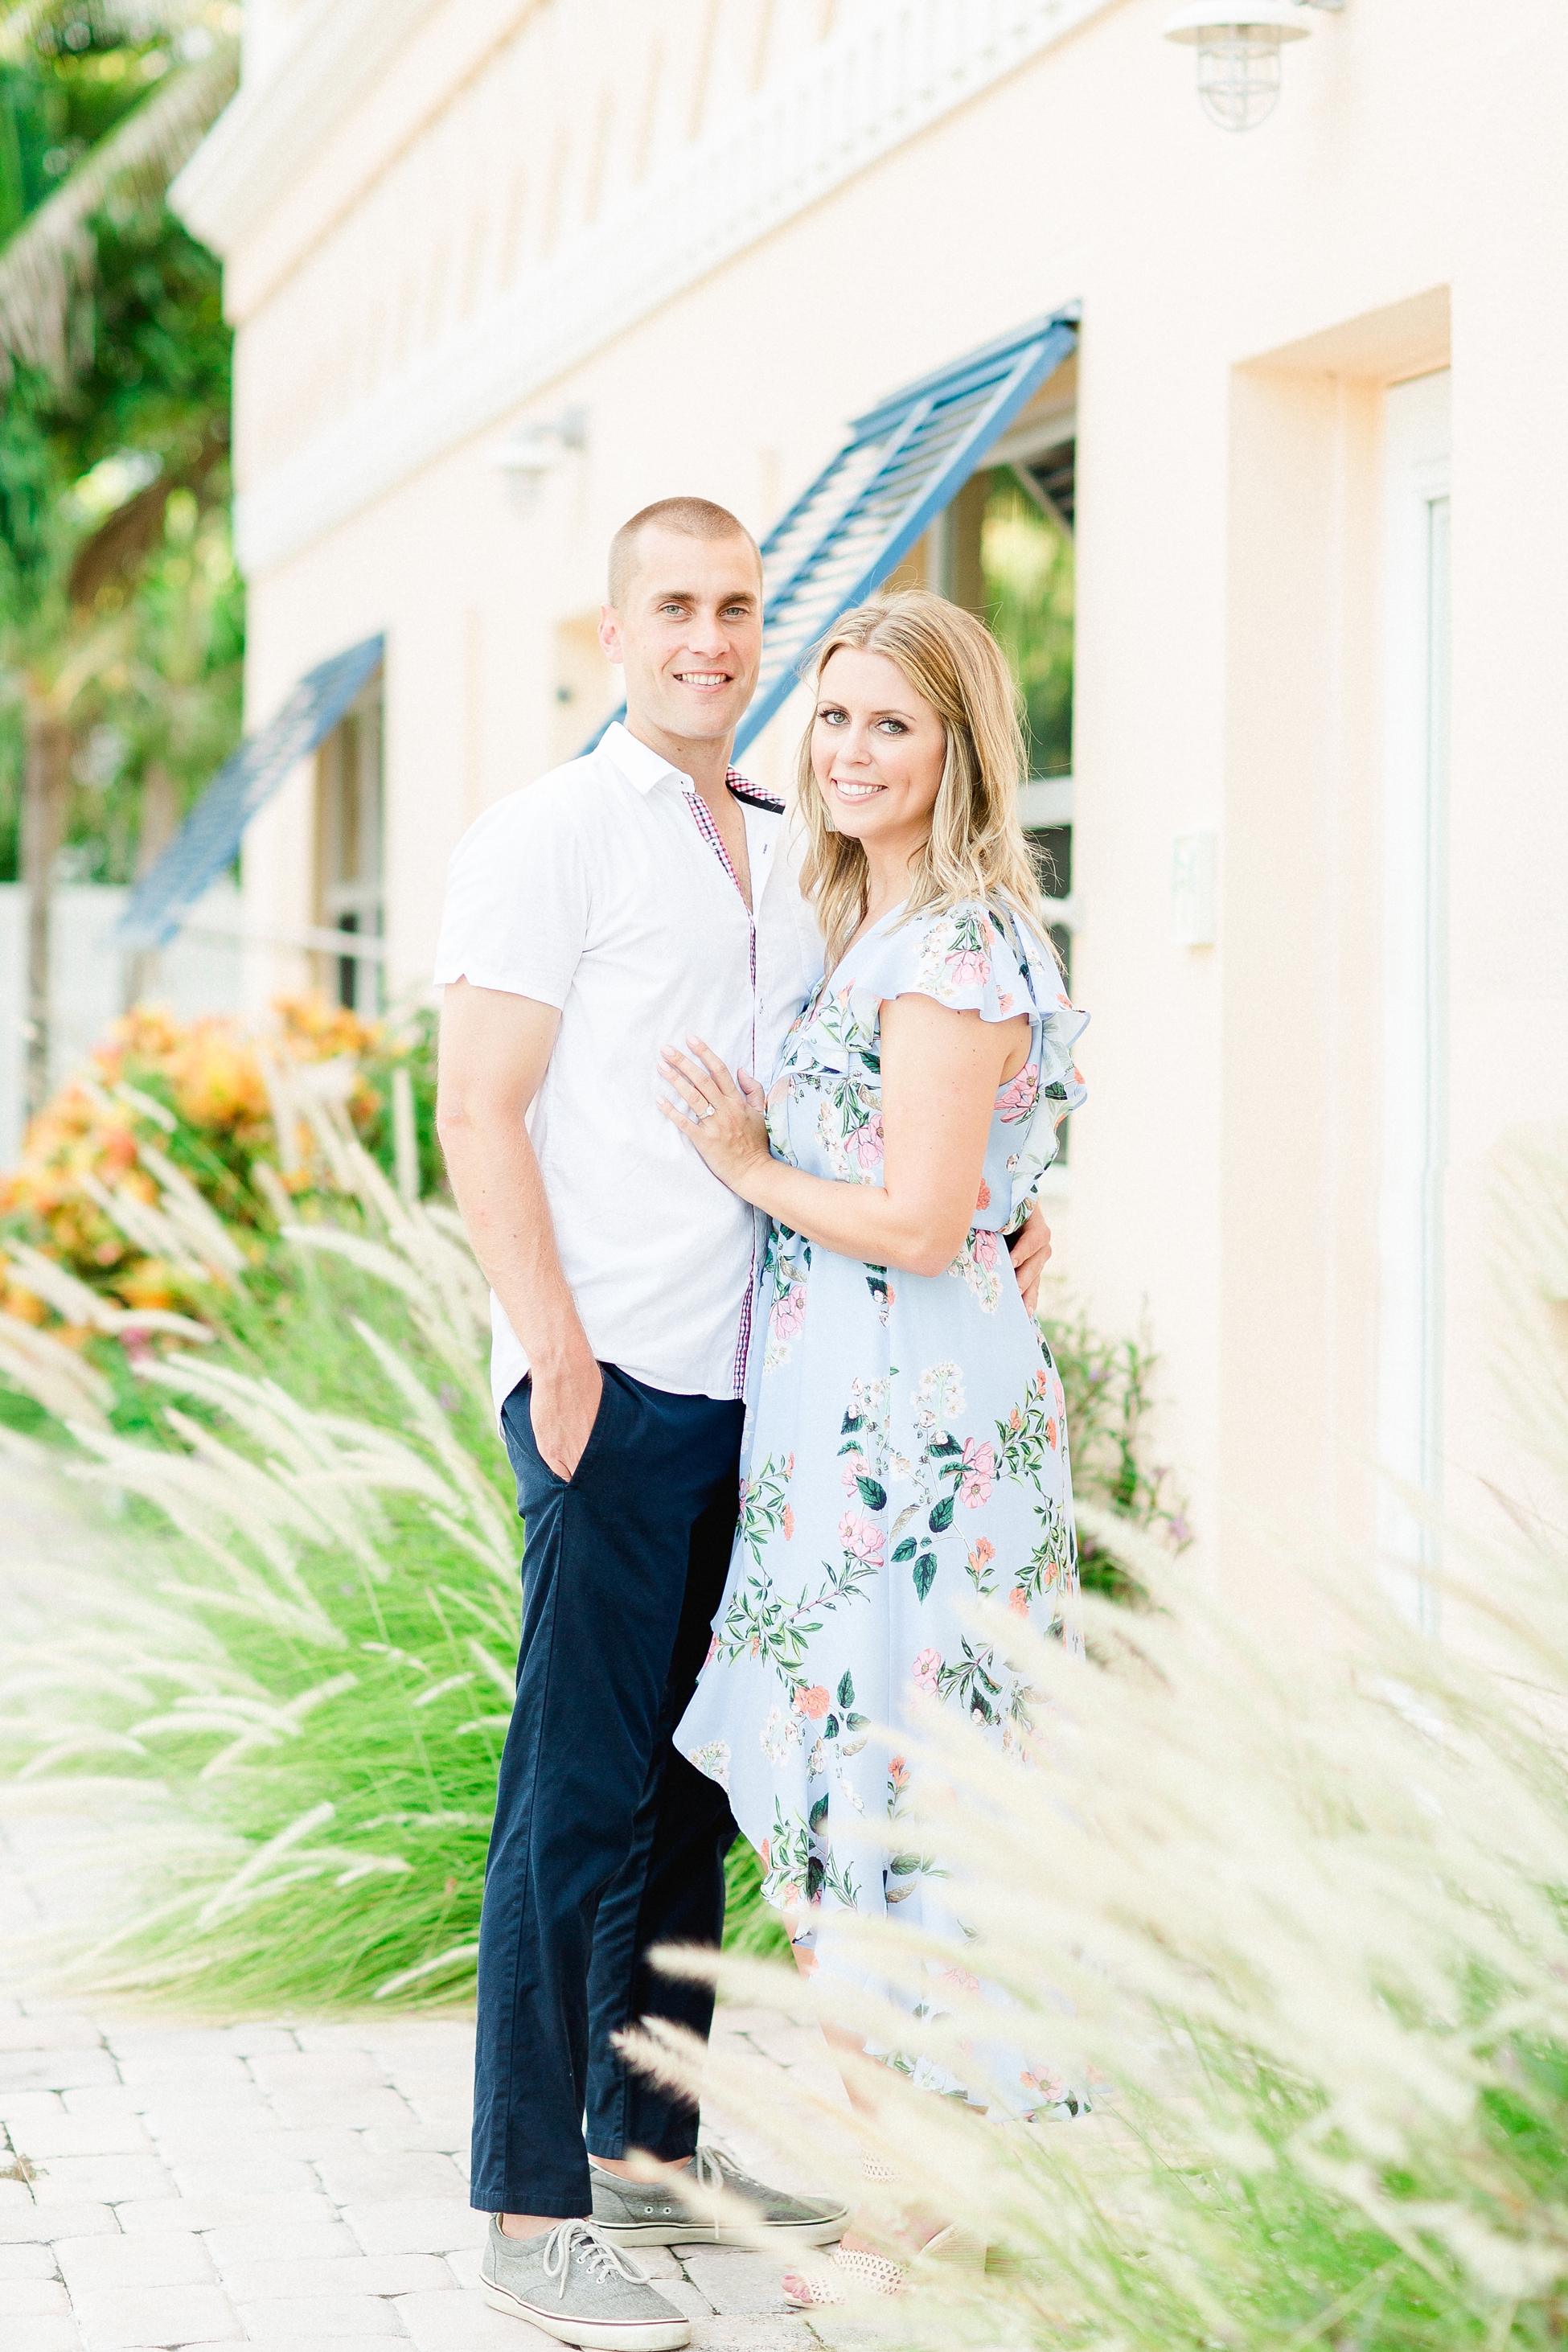 Florida Beach Engagement | © Ailyn LaTorre Photography 2018